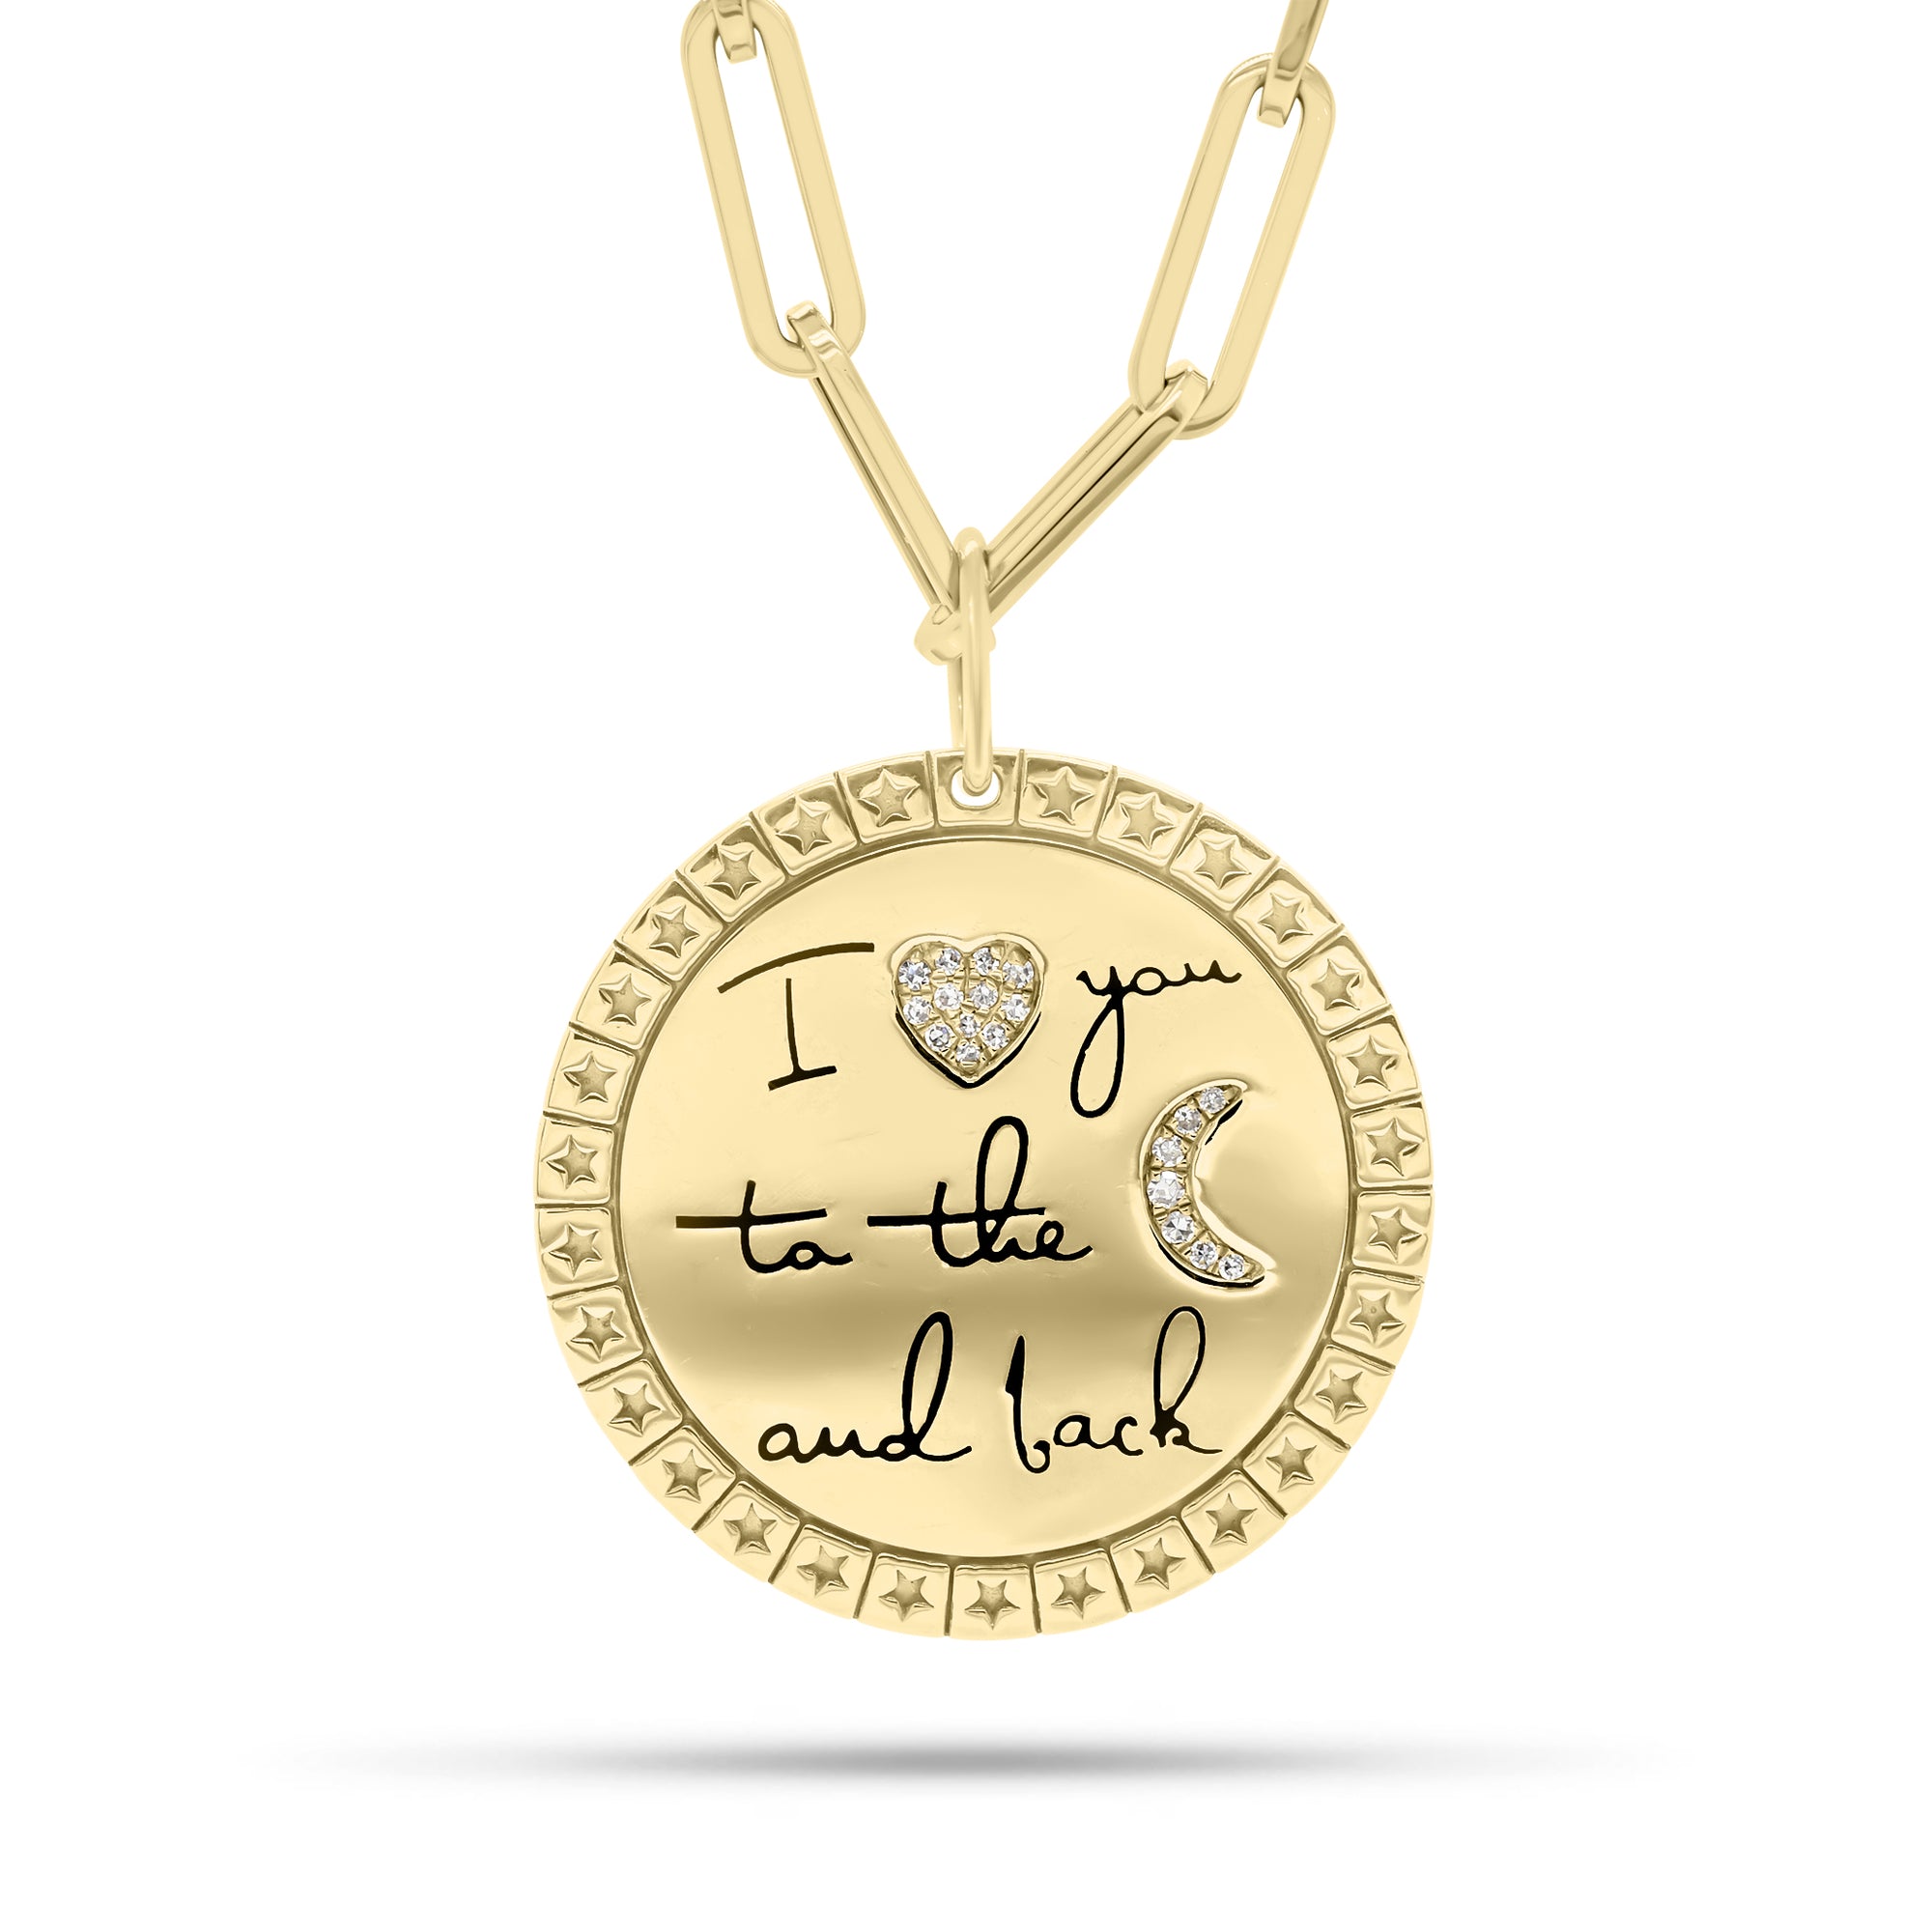 Diamond "I love you to the moon and back" pendant - 14K gold weighing 6.16 grams  - 19 round diamonds weighing 0.06 carats